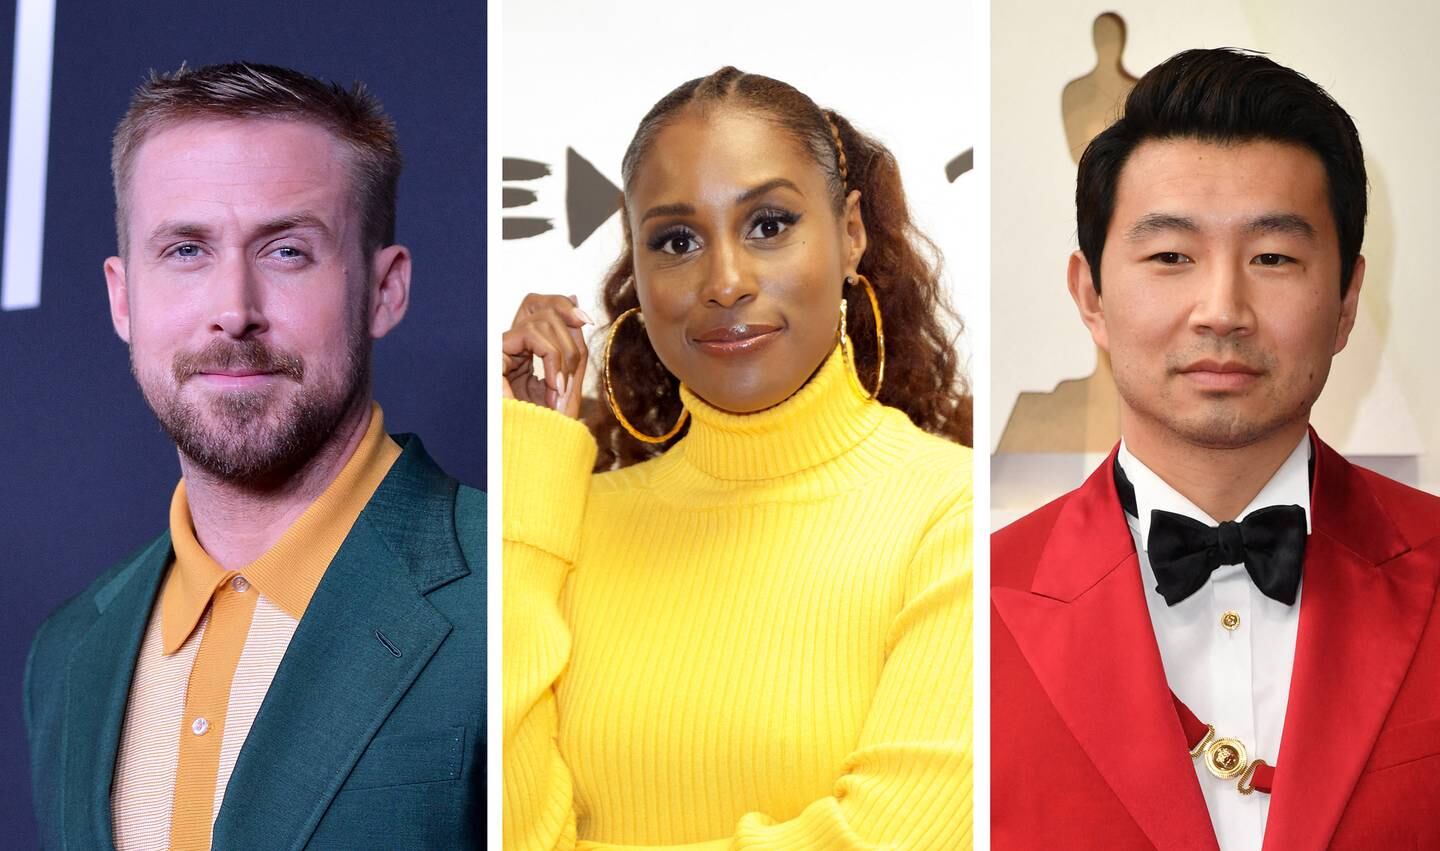 From left: Ryan Gosling will play Barbie's boyfriend, Ken, while Issa Rae and Simu Liu's characters are currently being kept under wraps. AFP